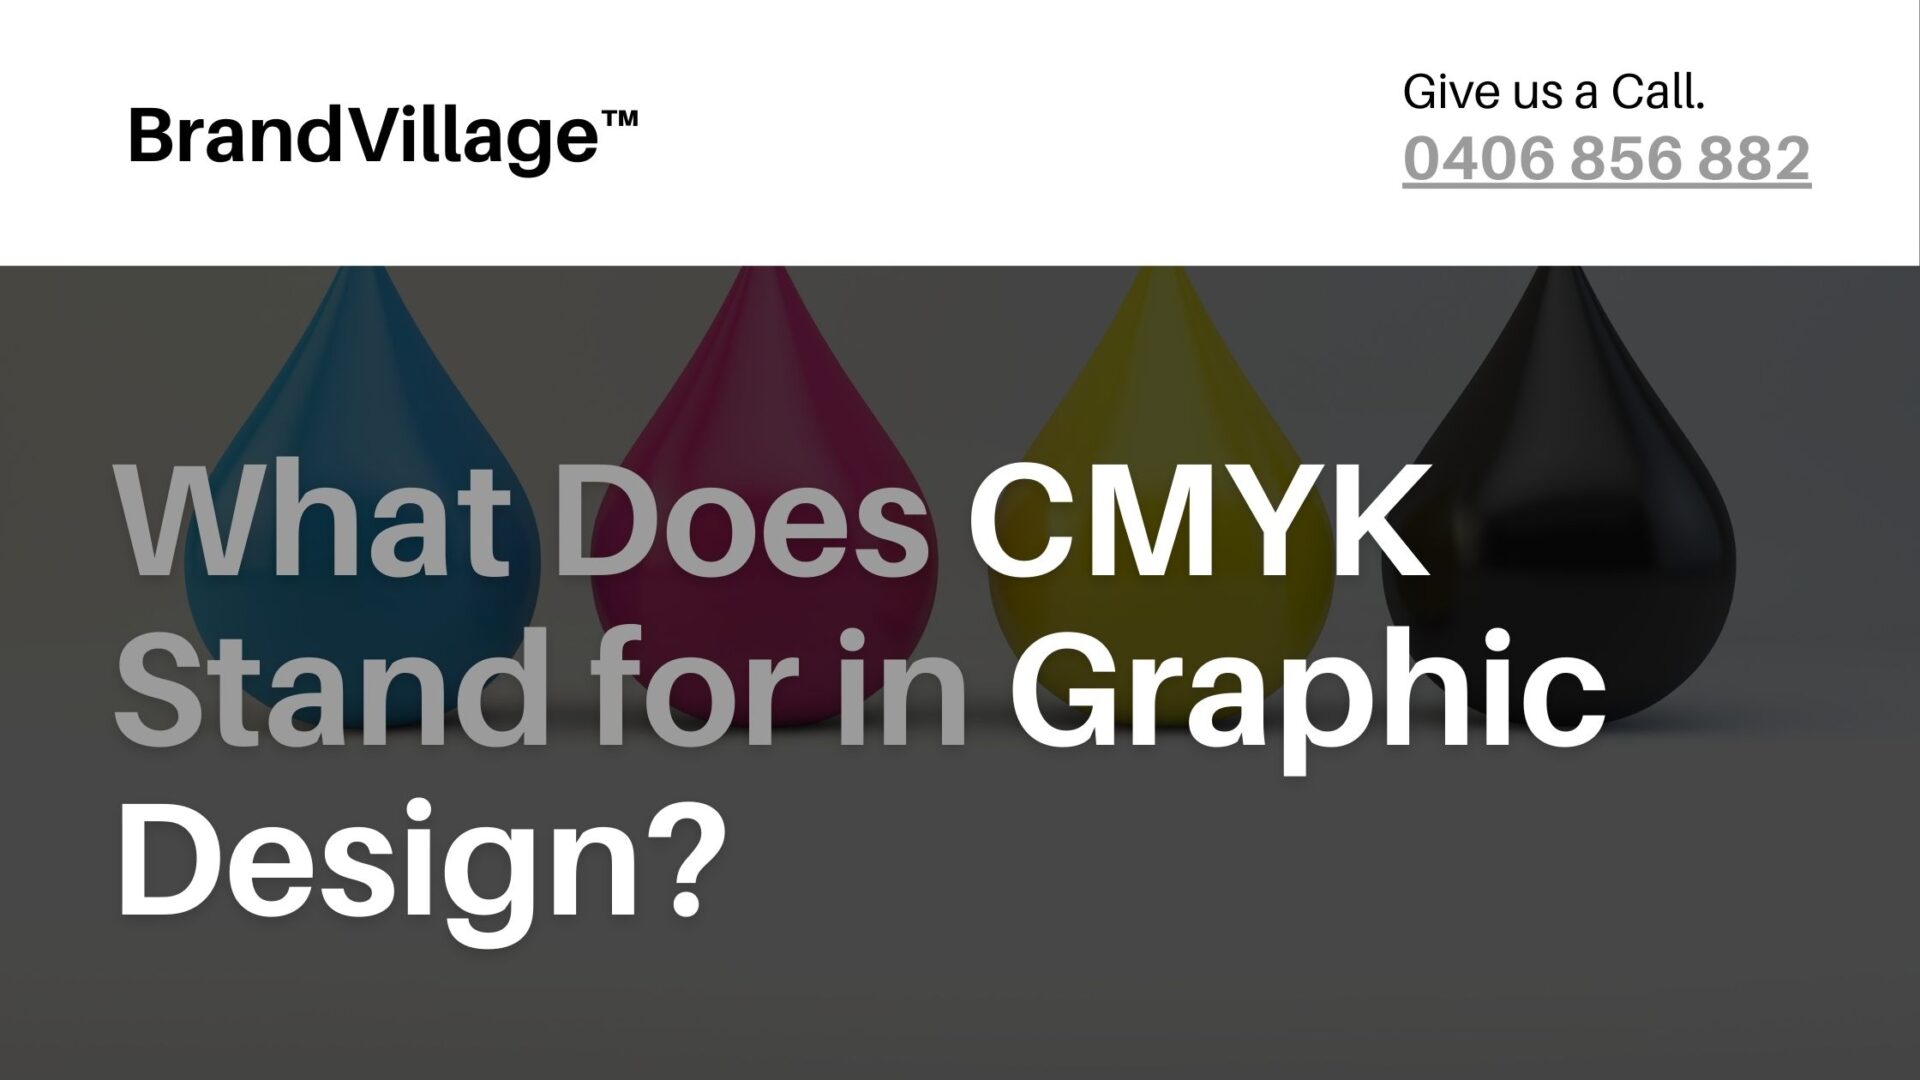 What Does CMYK Stand for in Graphic Design